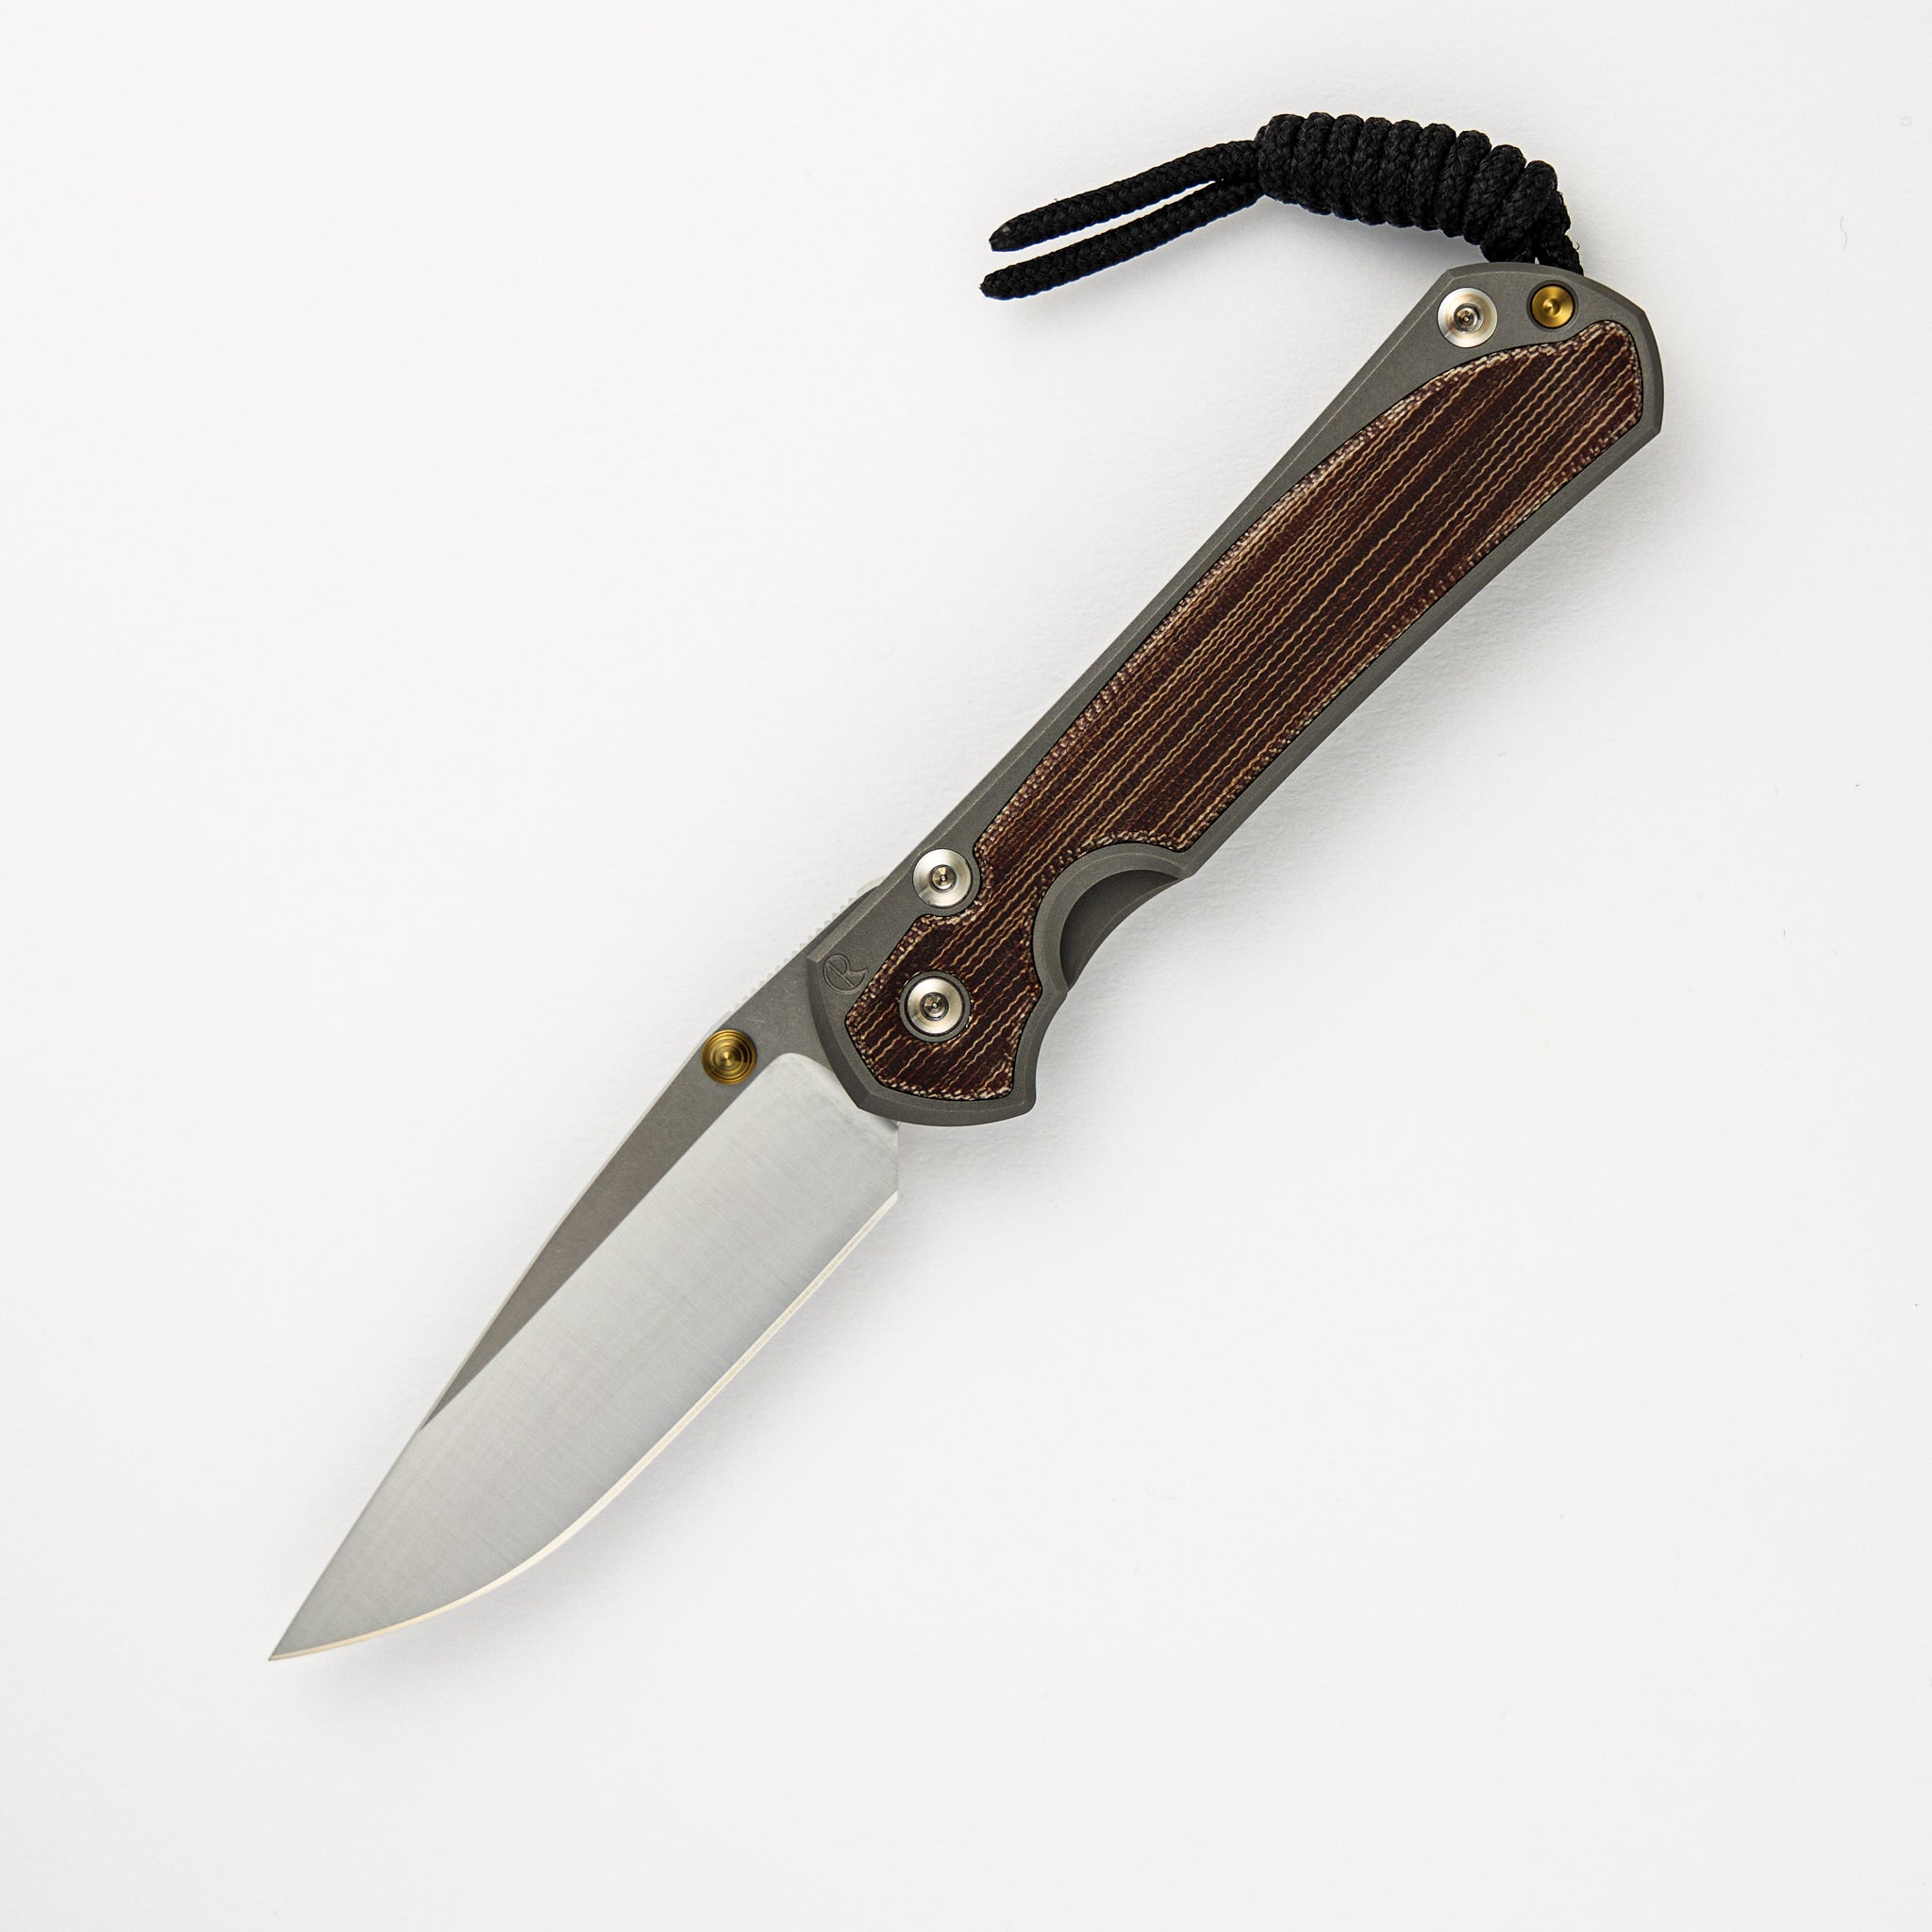 CHRIS REEVE SMALL SEBENZA 31 NATURAL CANVAS MICARTA INLAY – POLISHED CPM MAGNACUT BLADE – GLASS BLASTED – GOLD DOUBLE THUMB LUGS